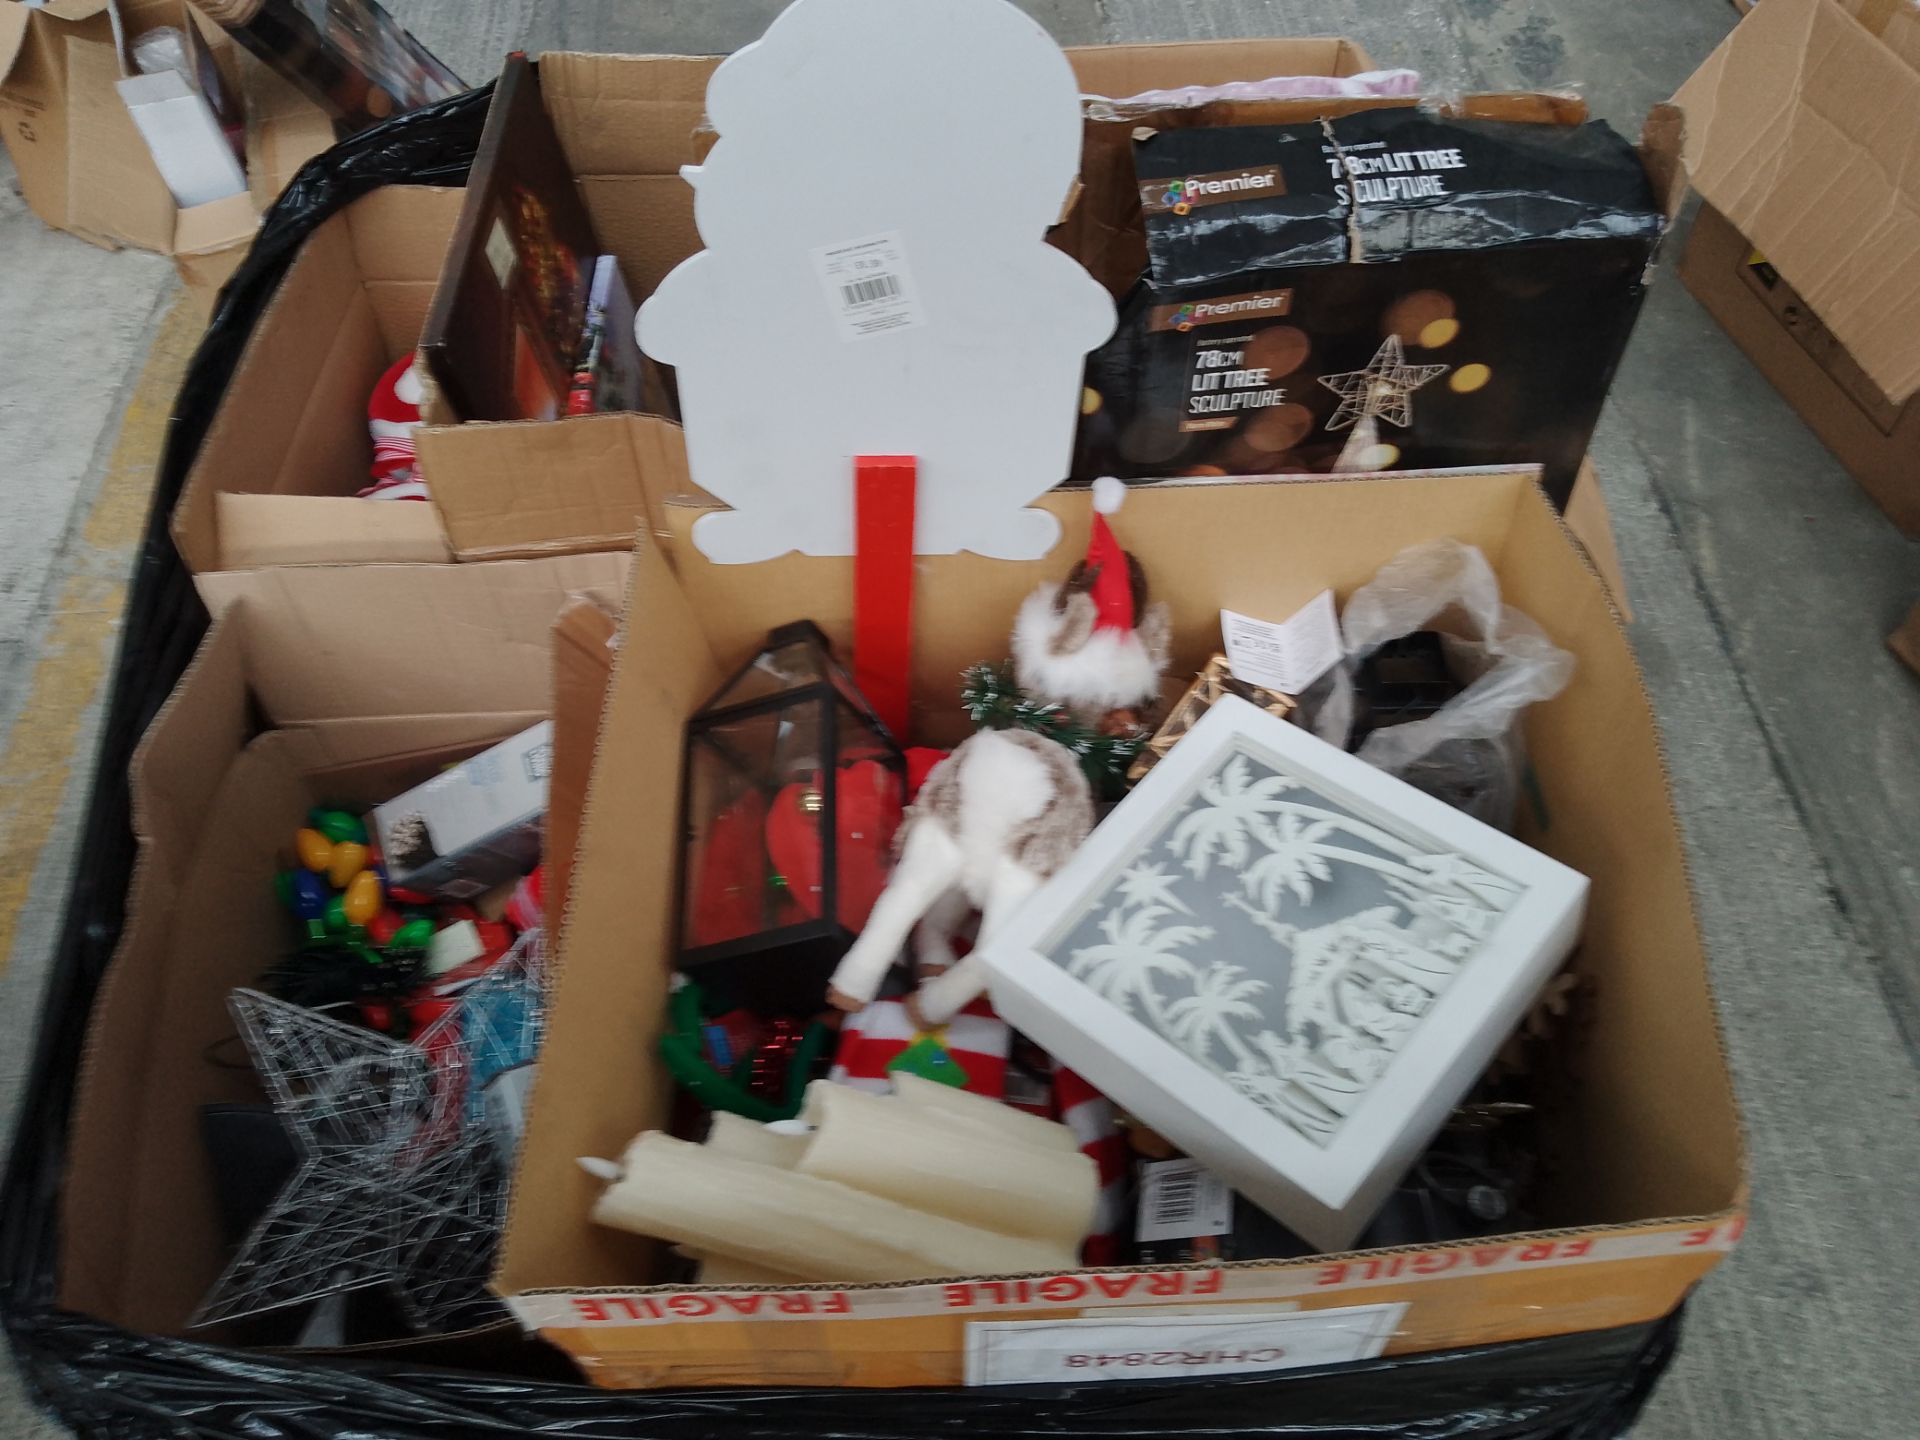 1 pallet of Mainly Appears New Christmas products - Lanterns, canvases, stuffed animals See pictures - Image 7 of 10